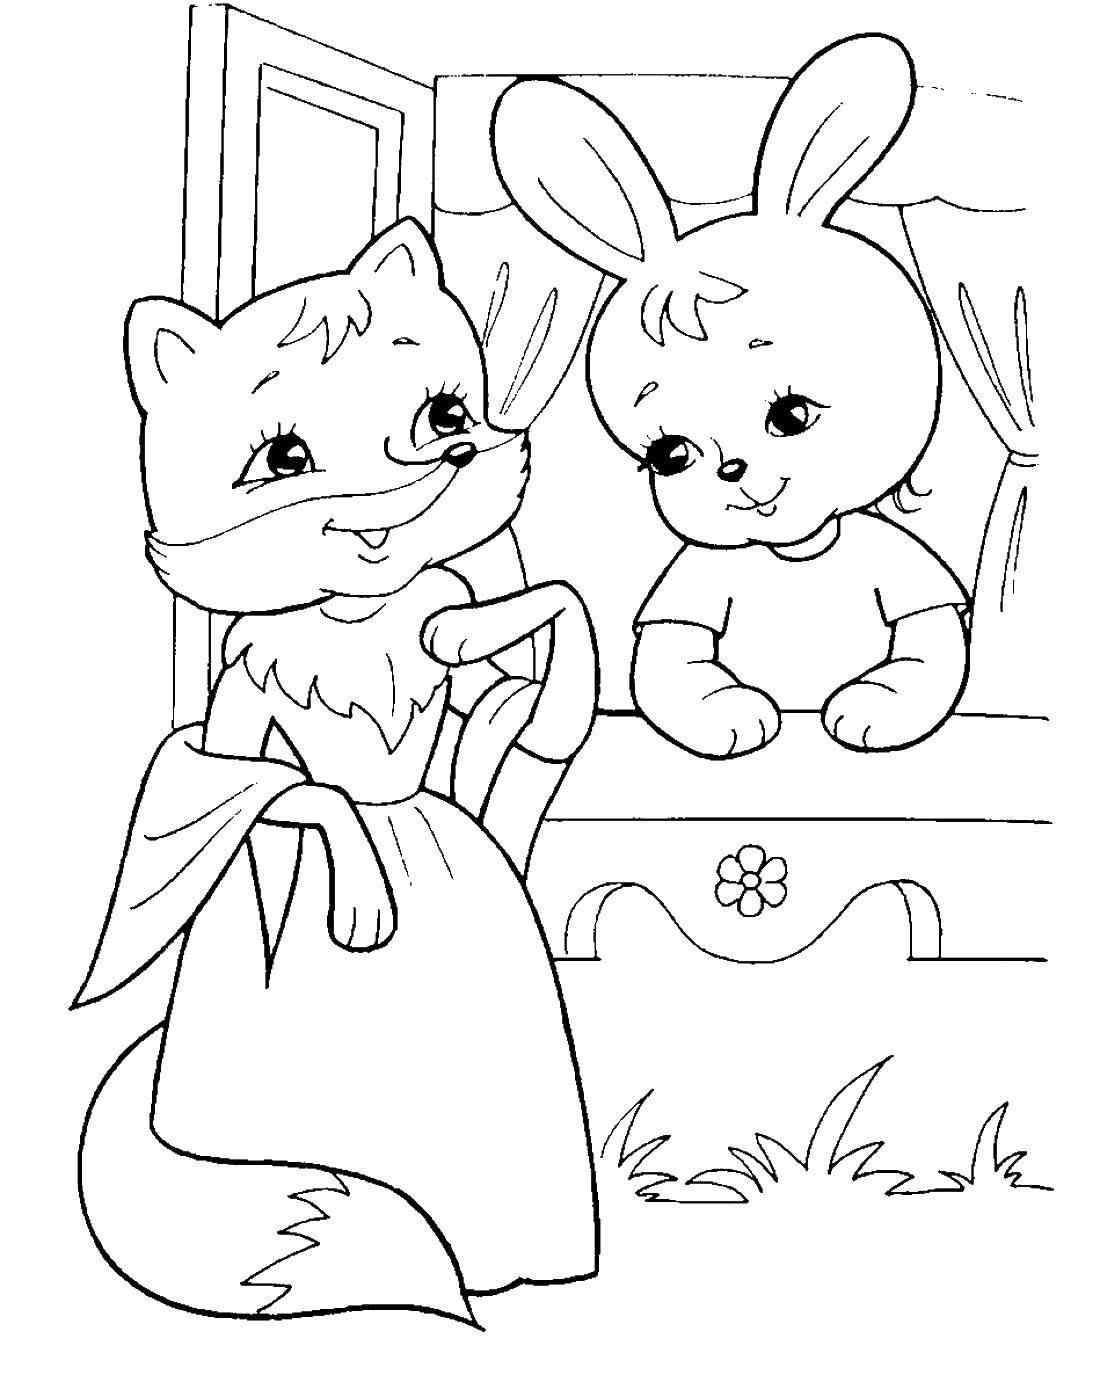 Coloring Fox and Bunny. Category the Fox. Tags:  a Fox, Bunny.